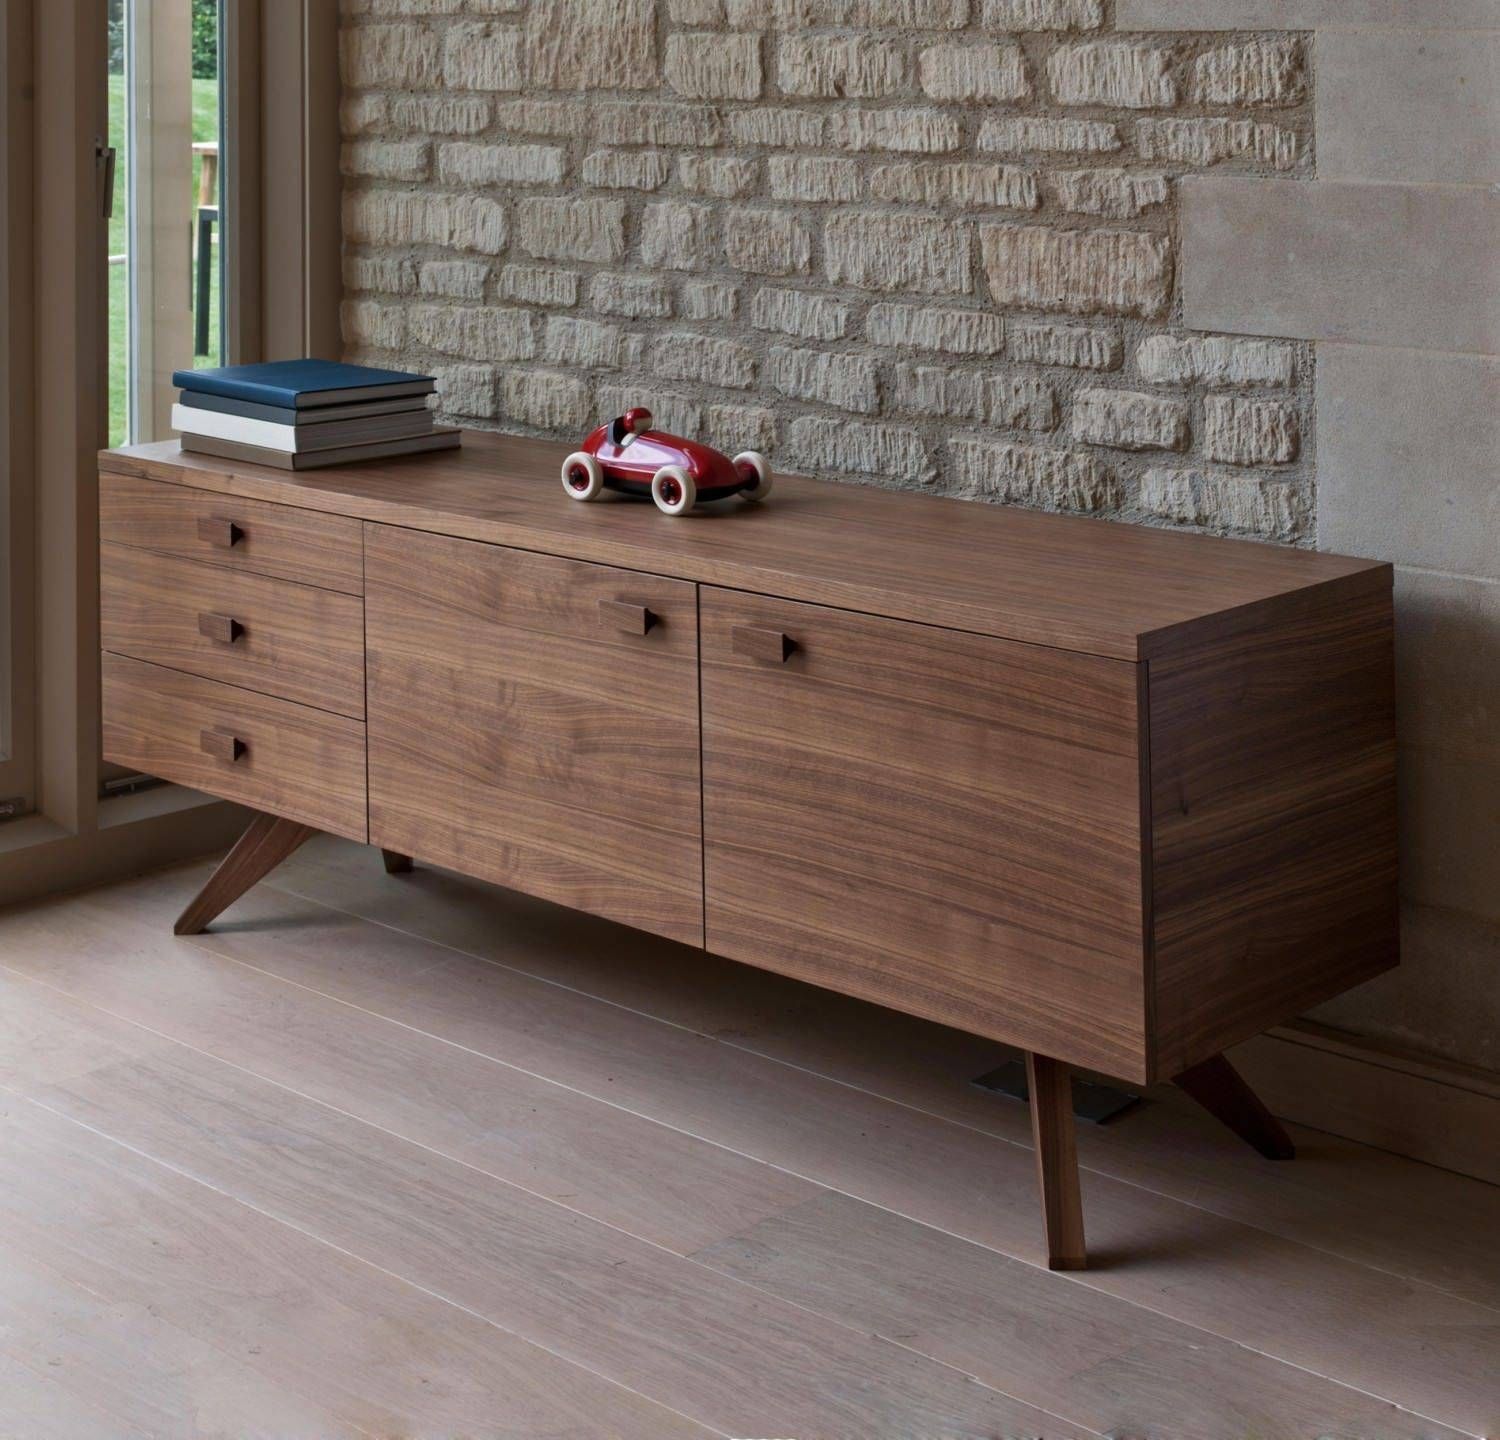 High Sideboard / Contemporary / Wooden – Crossmatthew Hilton For Contemporary Wood Sideboards (View 14 of 20)